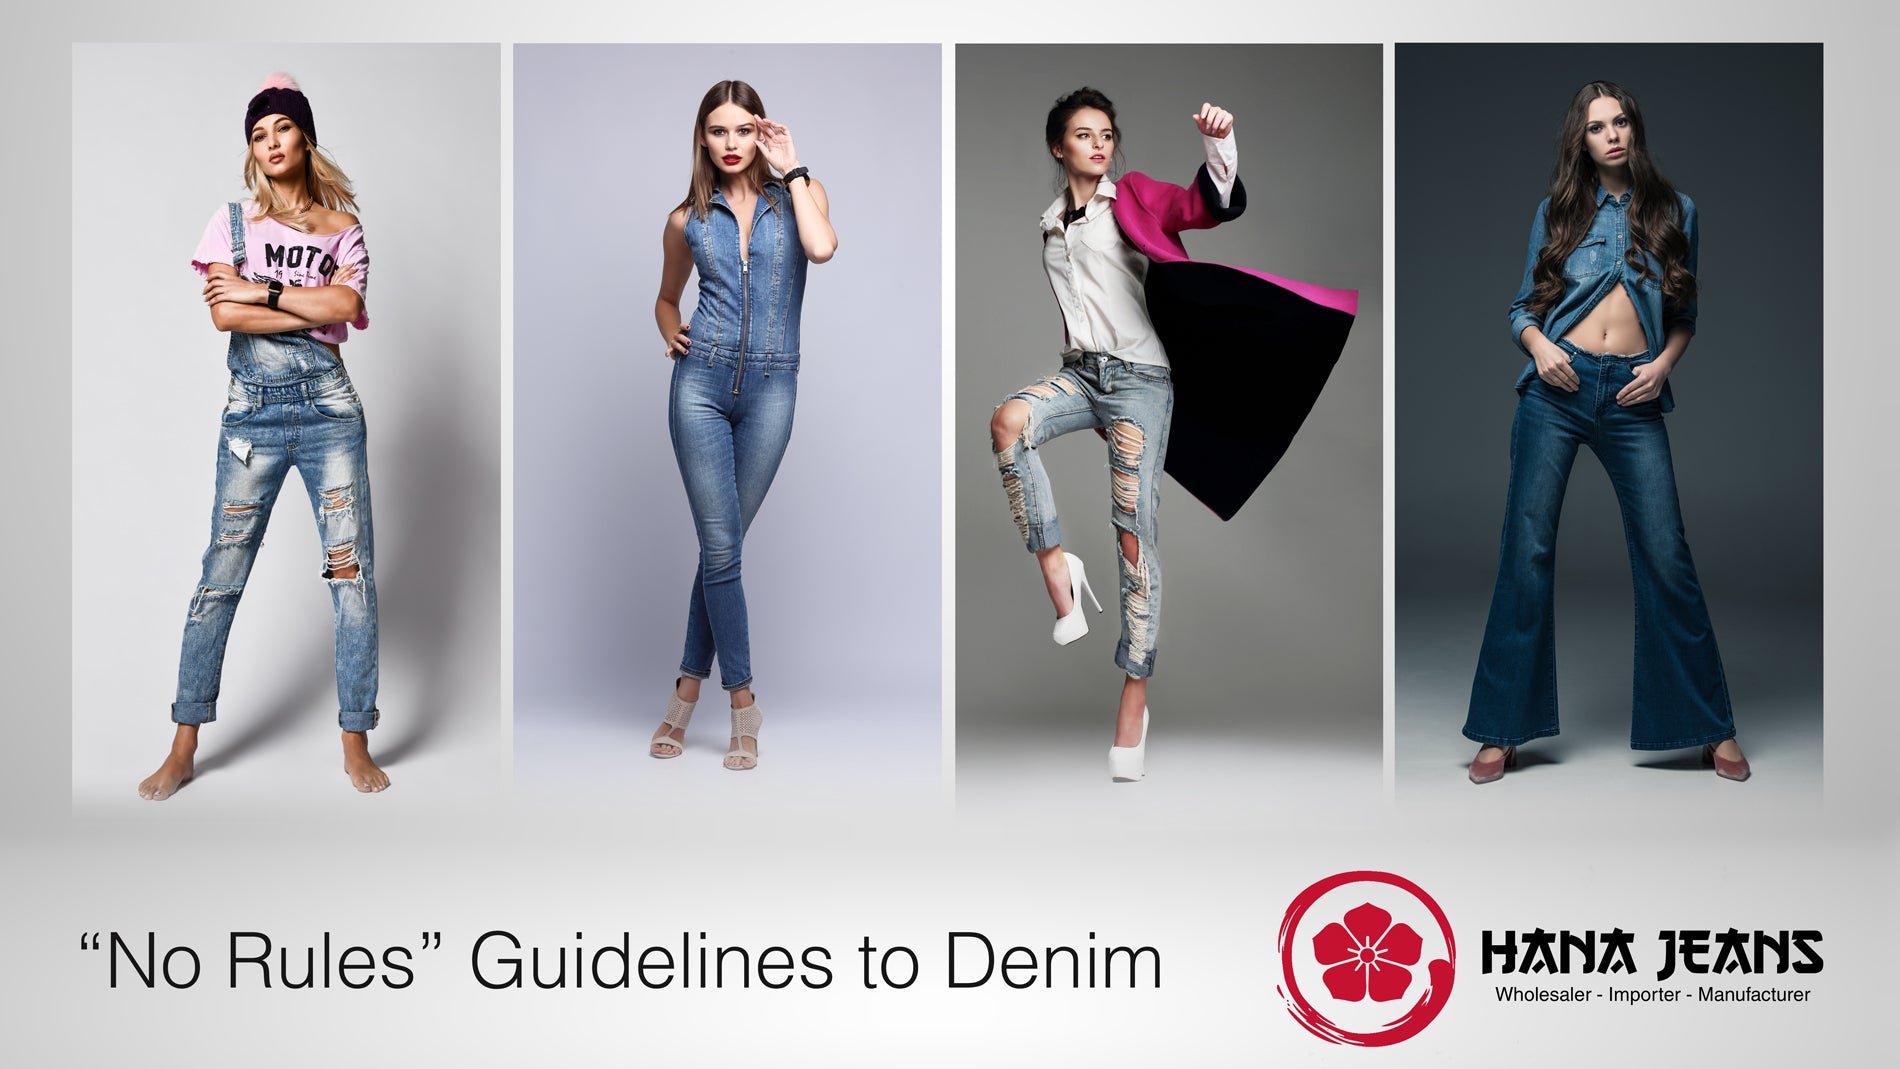 "No Rules" Guide to Women's Denim Jeans